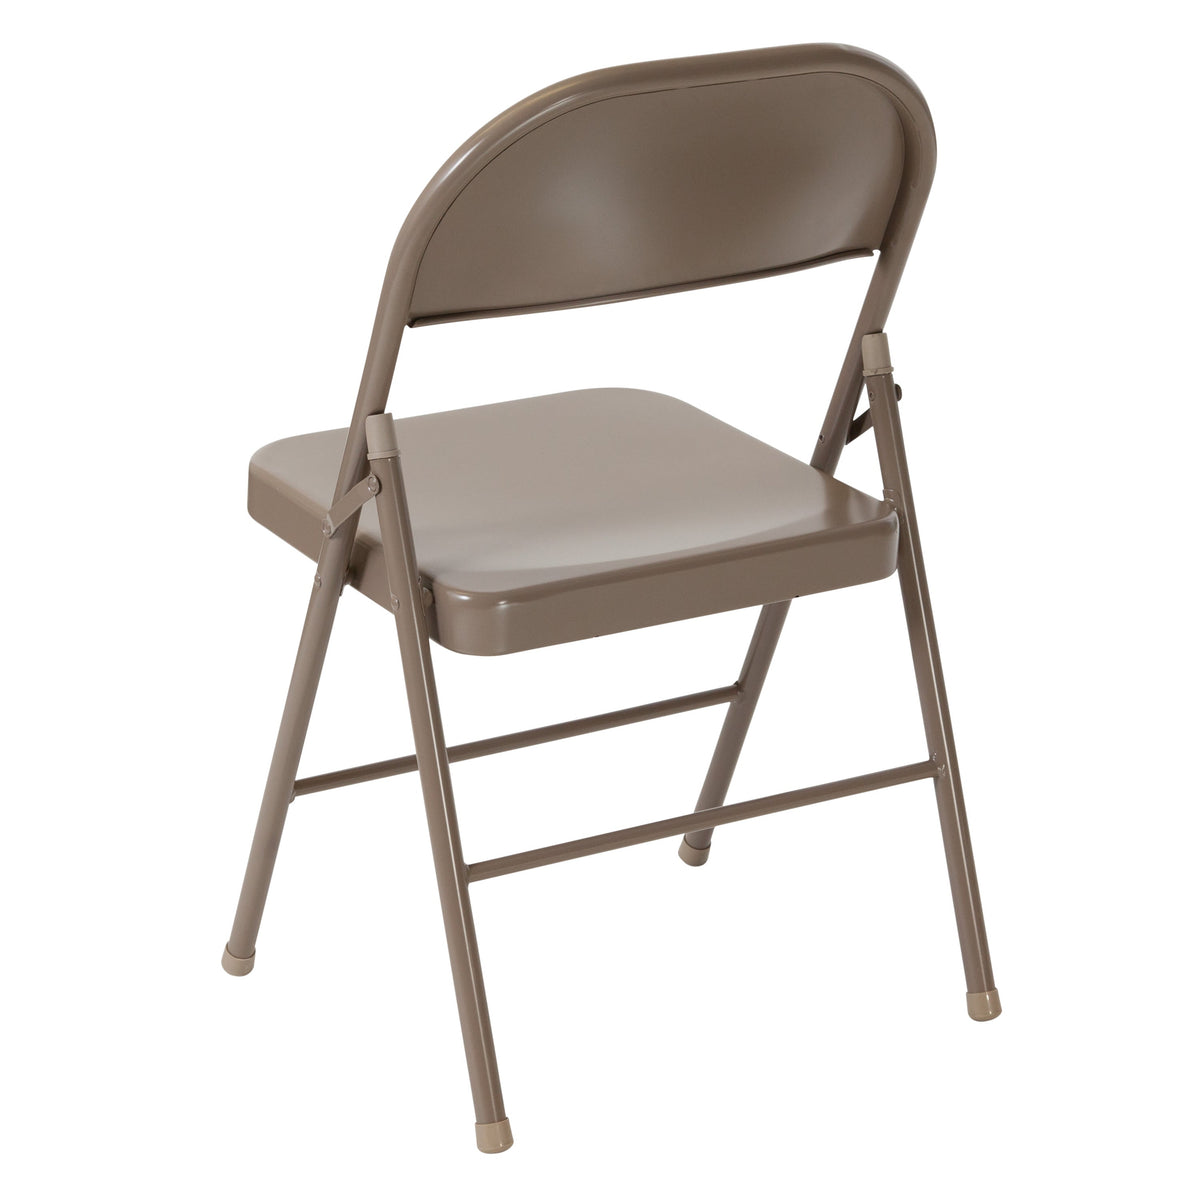 Beige |#| Double Braced Beige Metal Folding Chair - Event Chair - Portable Chair